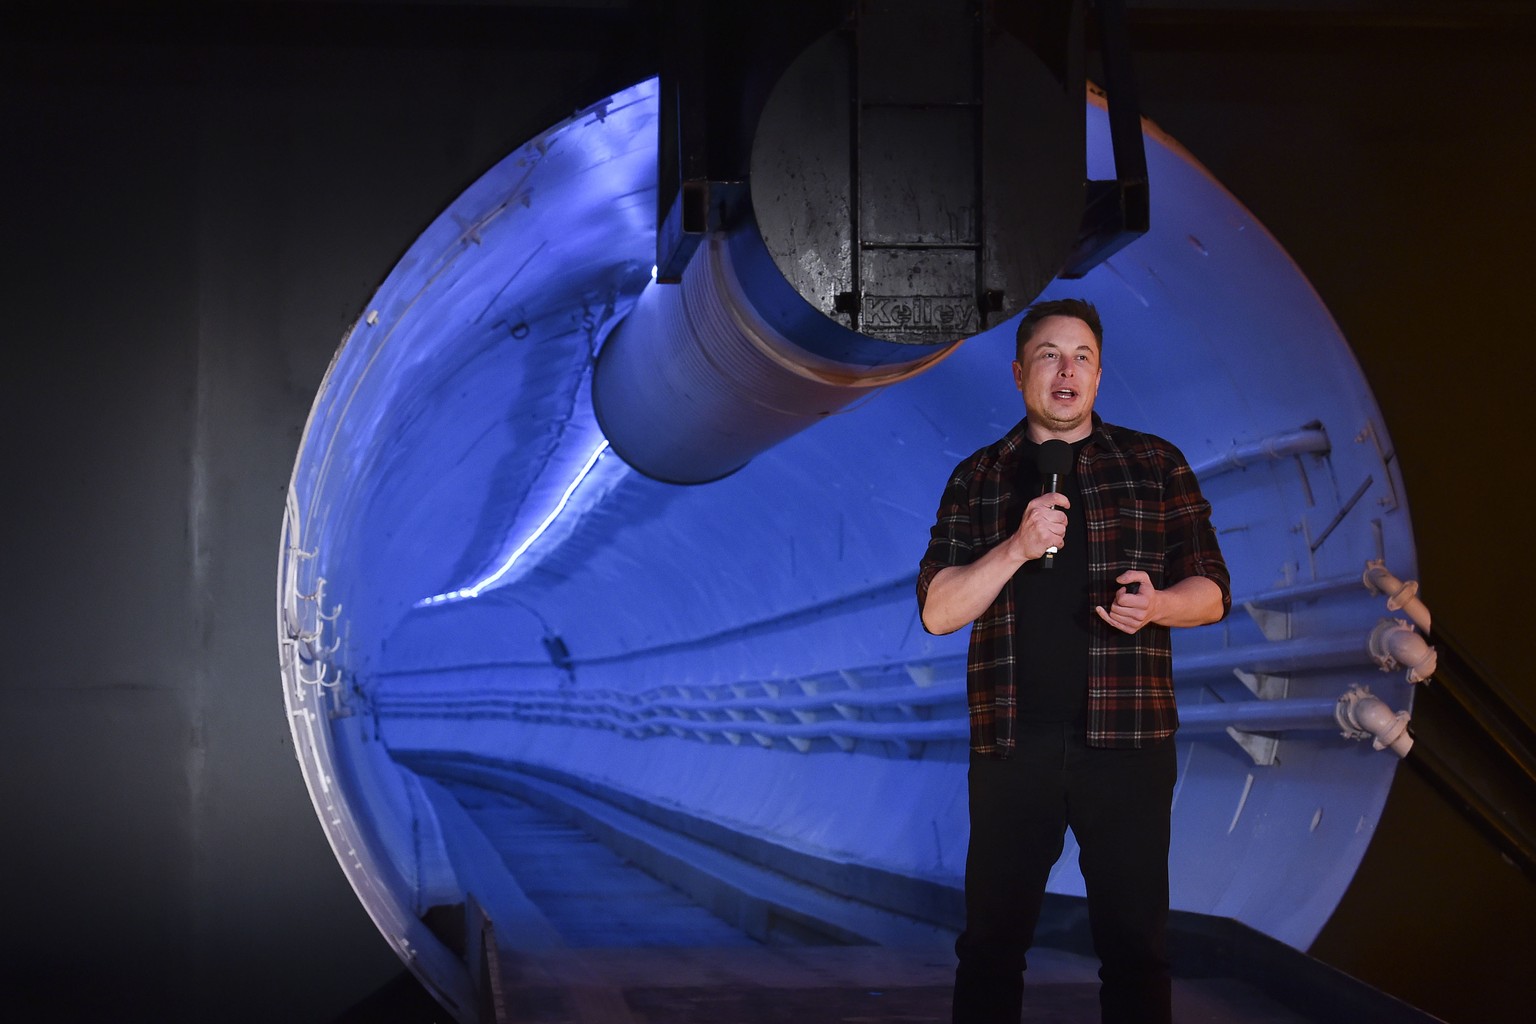 Elon Musk, co-founder and chief executive officer of Tesla Inc., speaks during an unveiling event for the Boring Co. Hawthorne test tunnel in Hawthorne, Calif., on Tuesday, Dec. 18, 2018. Musk has unv ...